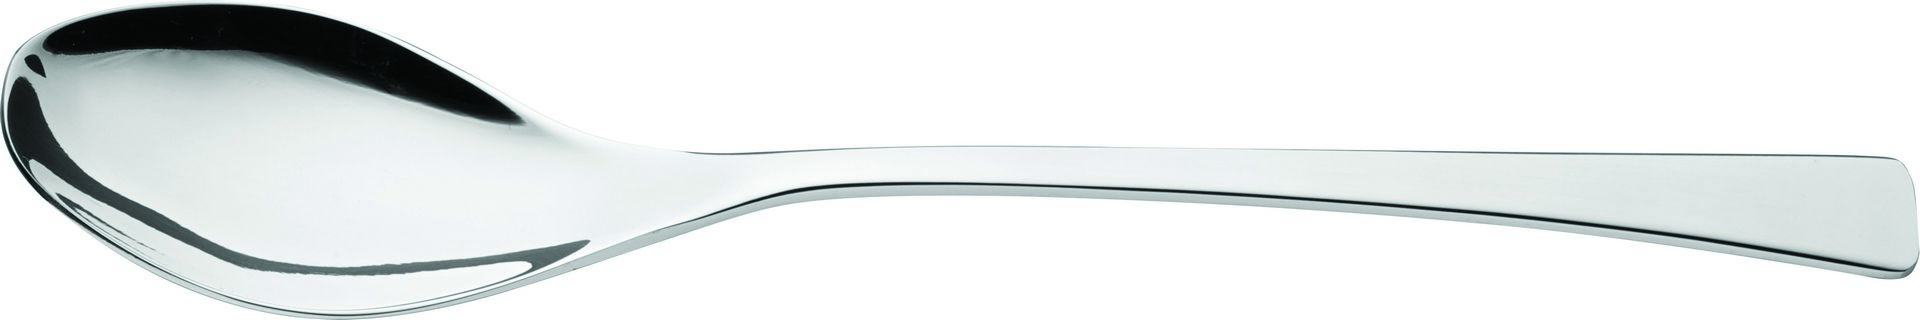 Curve Table Spoon - F38008-000000-B01012 (Pack of 12)